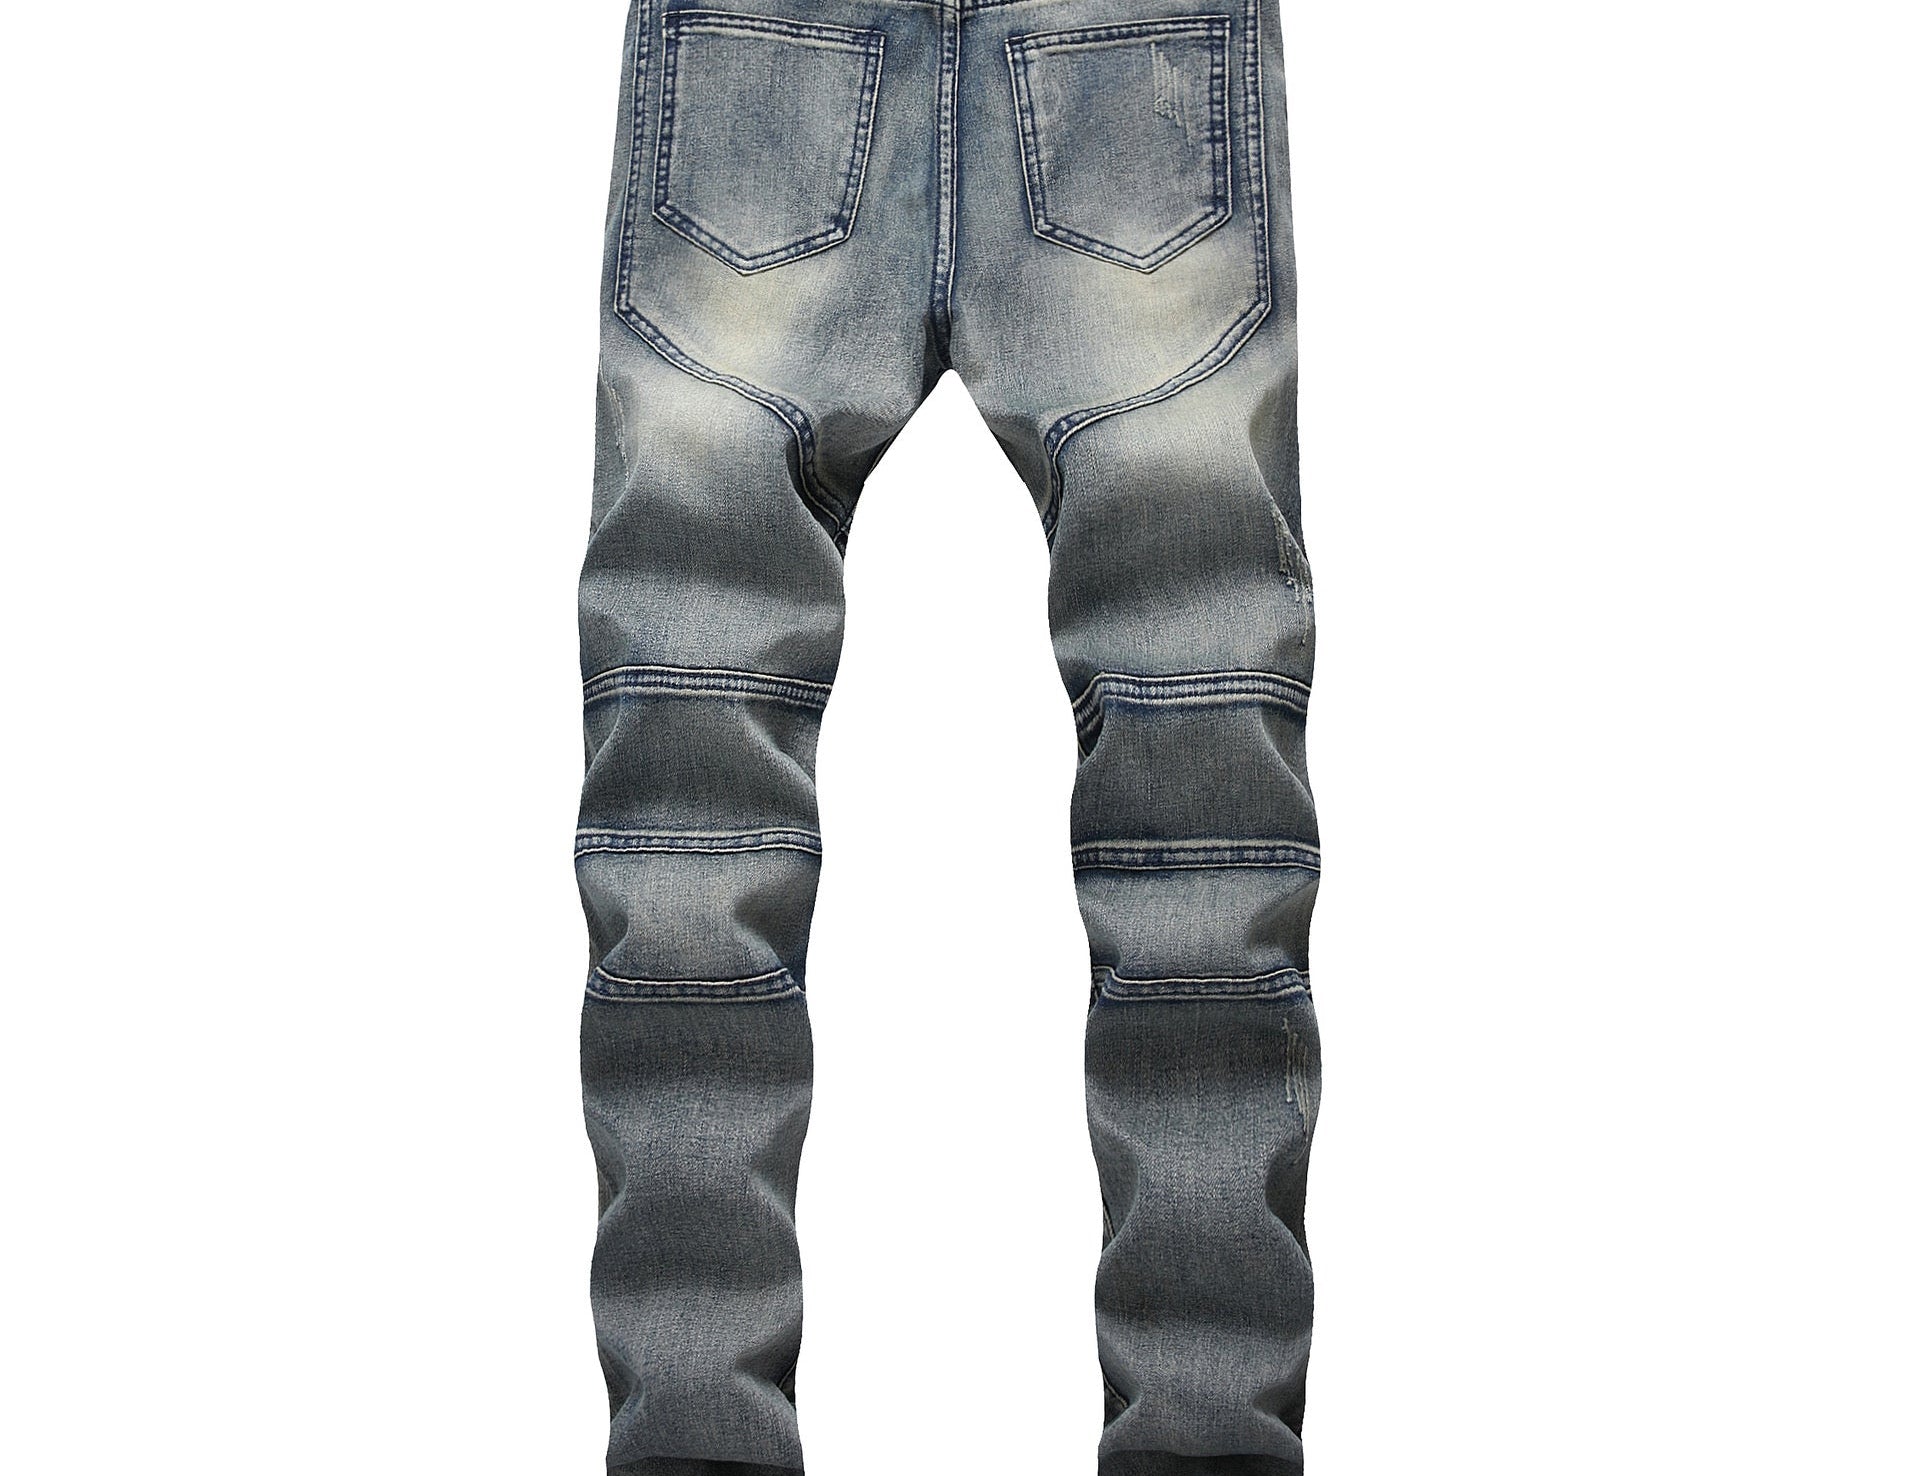 NOOK - Denim Jeans for Men - Sarman Fashion - Wholesale Clothing Fashion Brand for Men from Canada